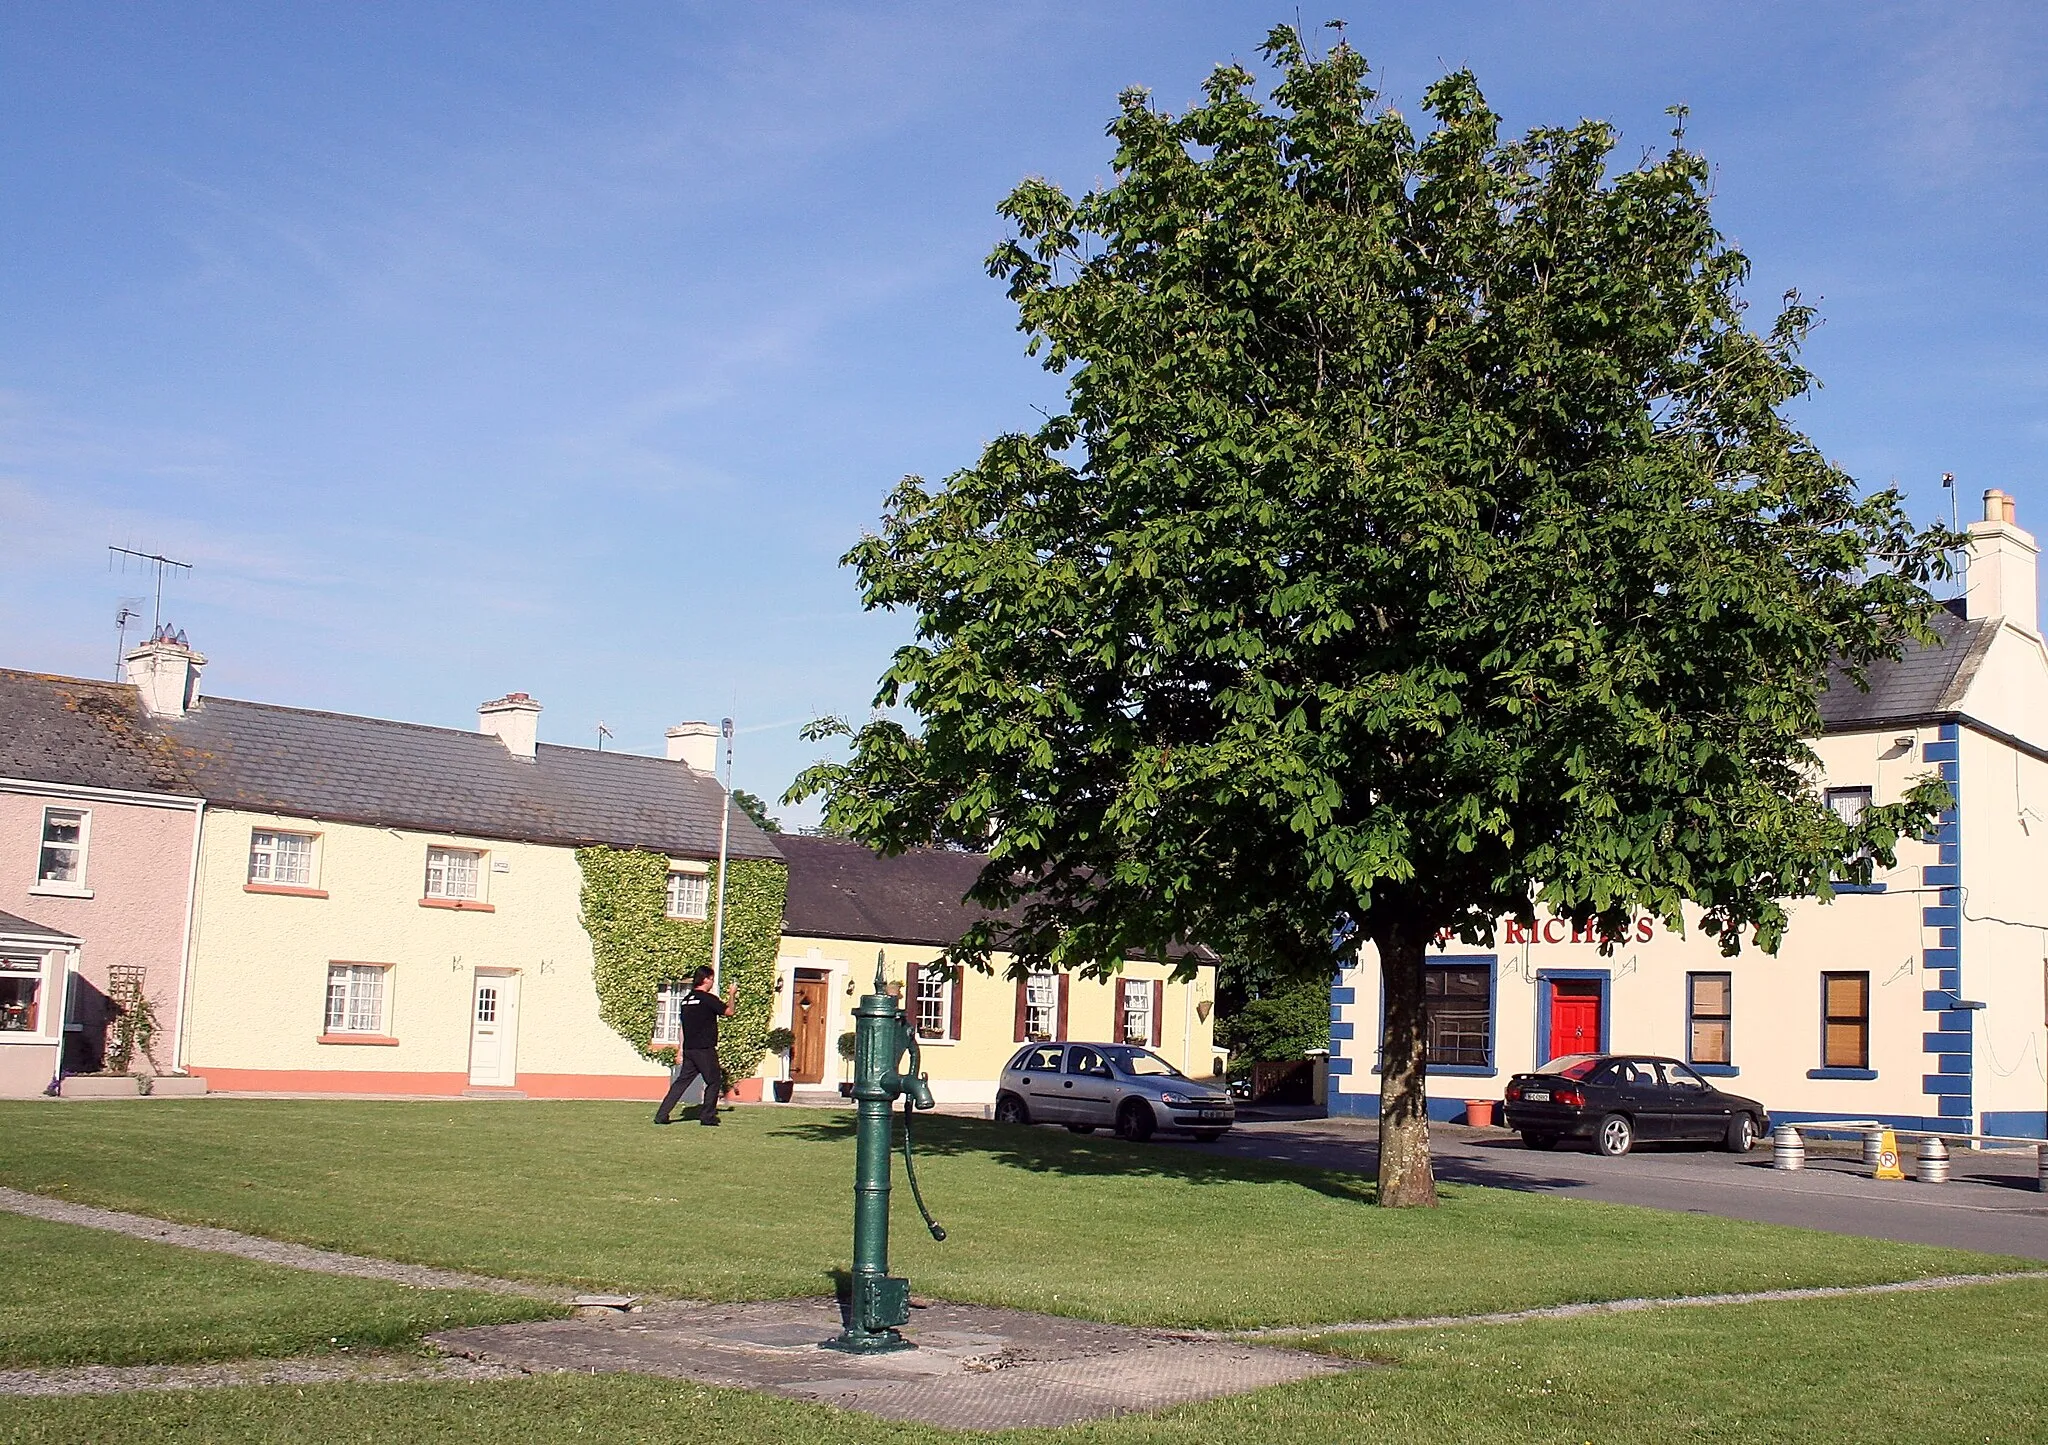 Photo showing: Clonbulloge, County Offaly, Ireland